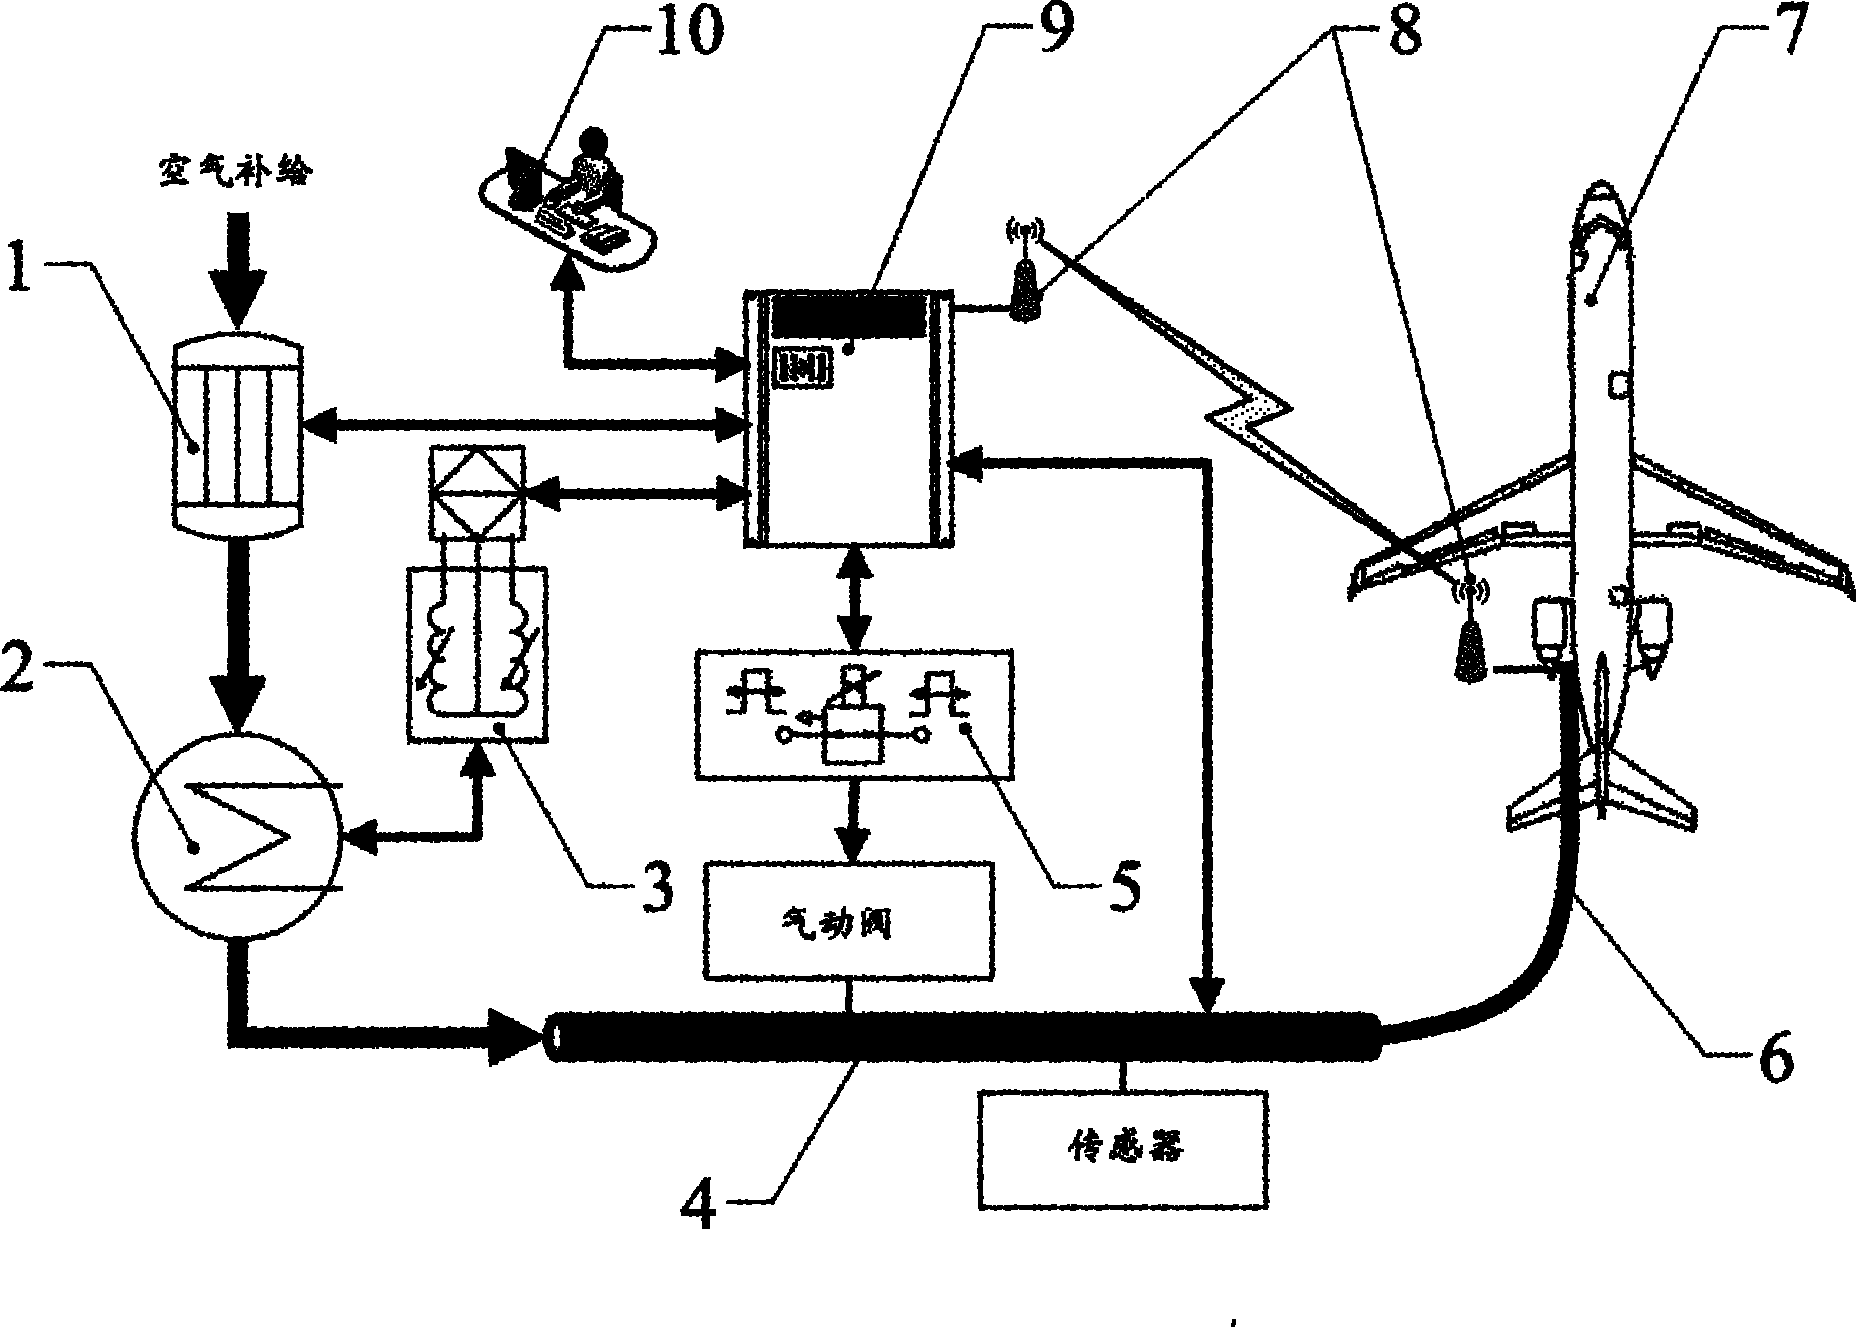 Automation device for use in civil aircraft environment control system function test